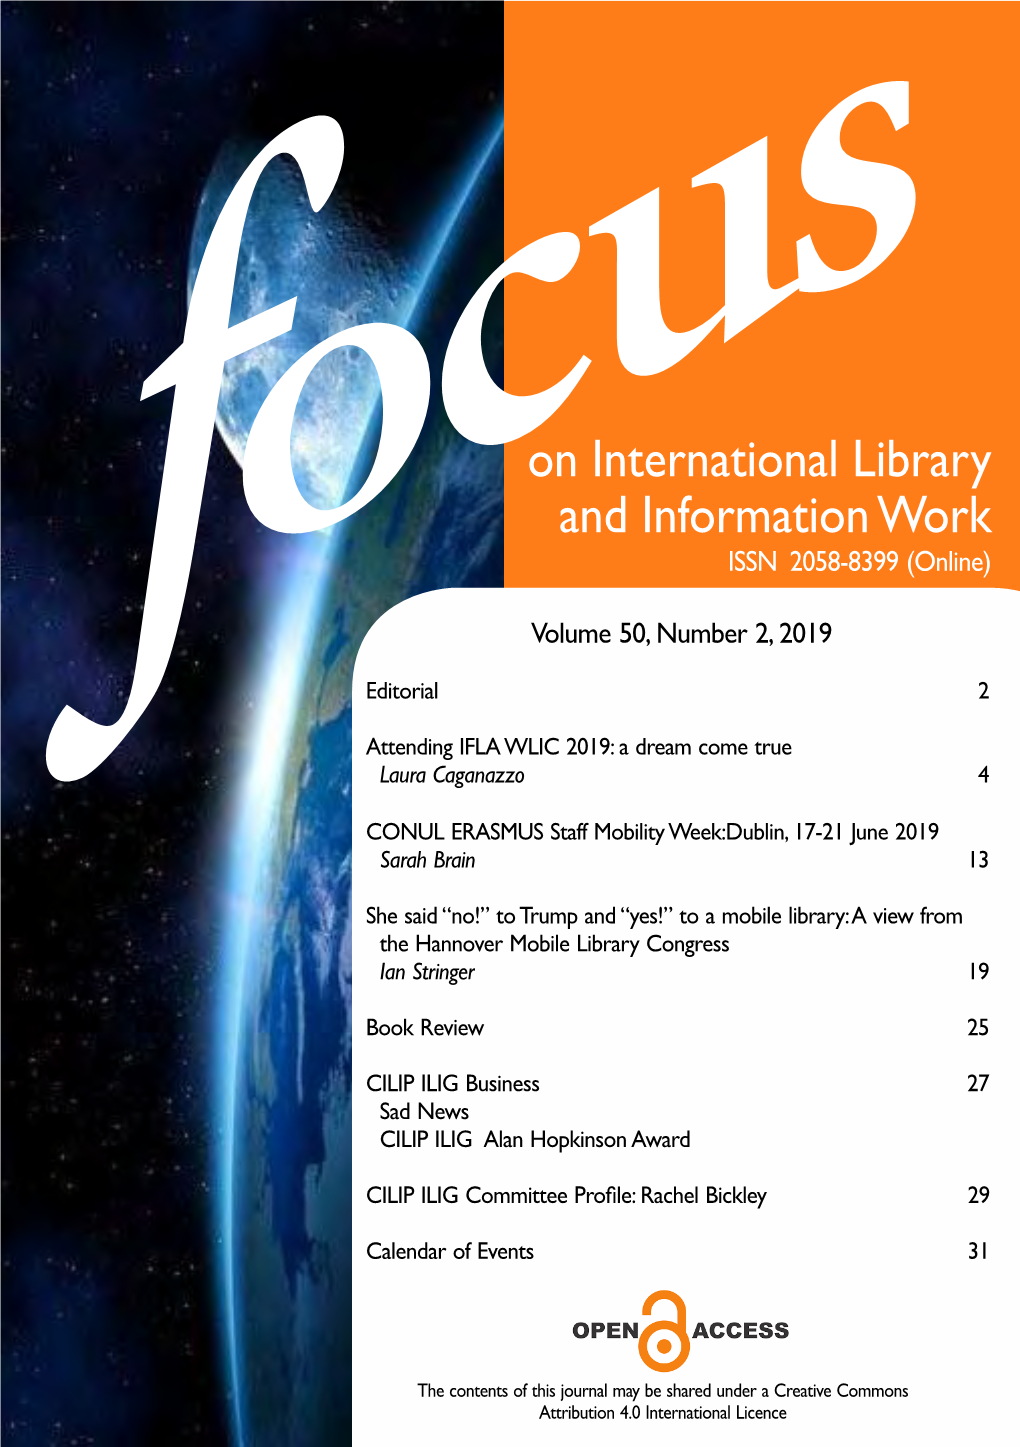 On International Library and Information Work ISSN 2058-8399 (Online)